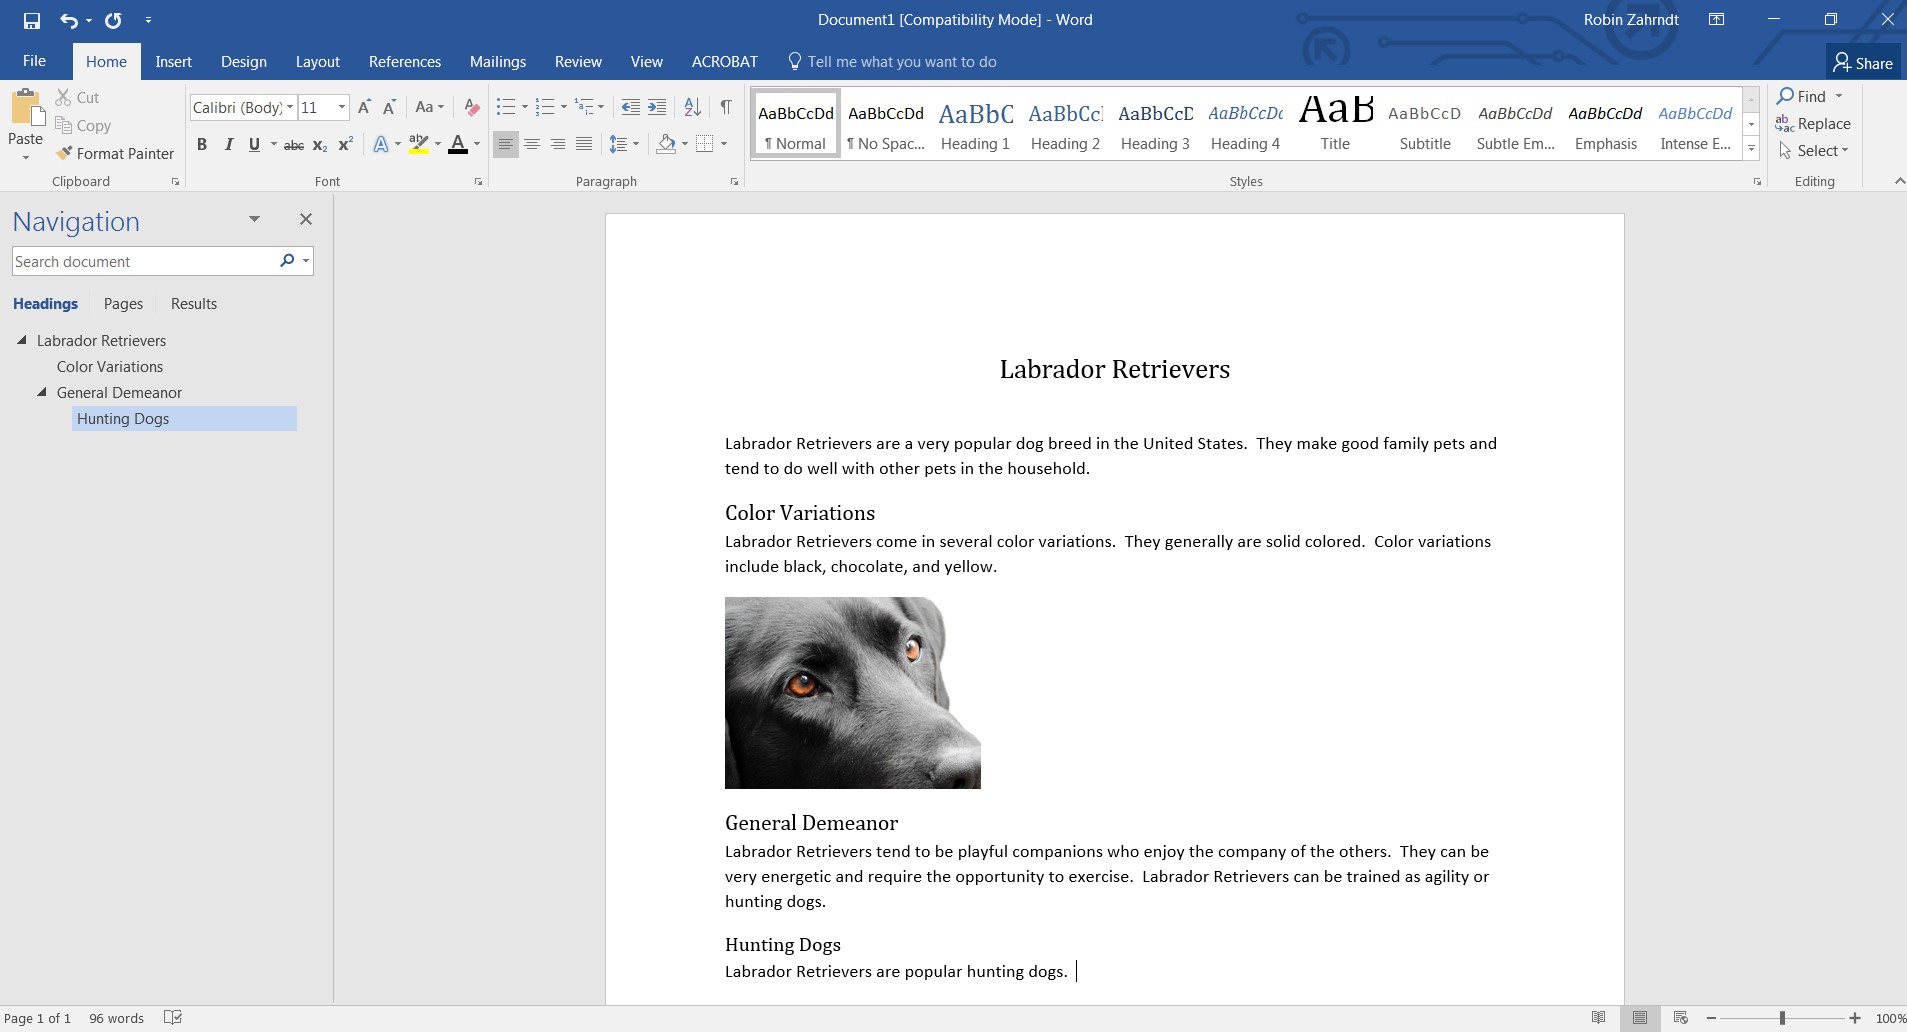 Screenshot of a Microsoft Word document on Labrador Retrievers. The document uses headings in a sequential order to organize content. 